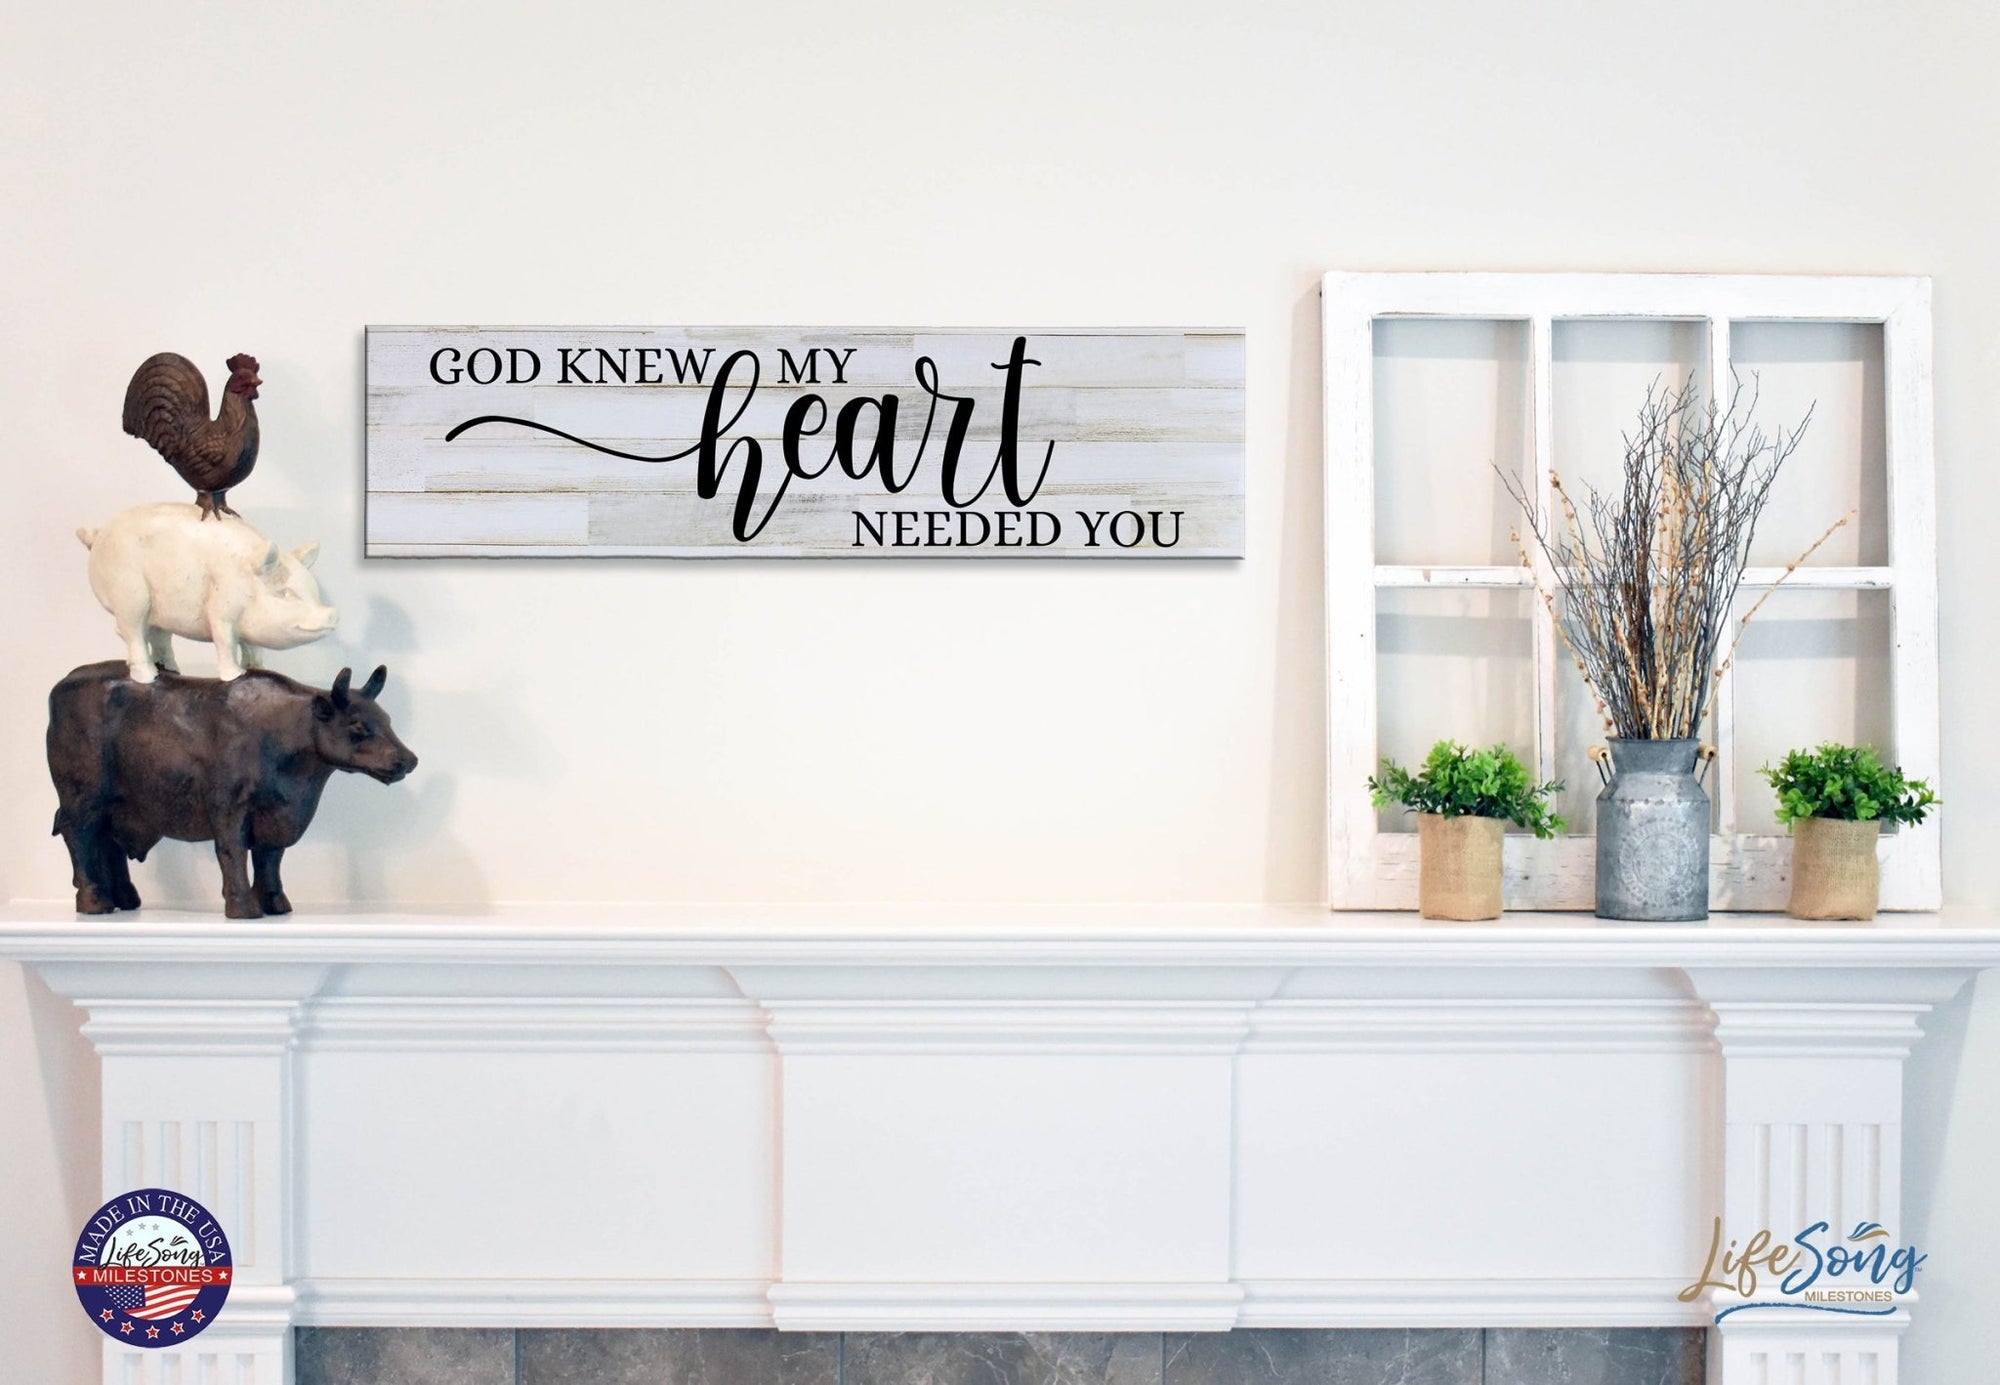 Inspirational Modern Wooden Wall Hanging Plaque 10x40 - God Knew My Heart - LifeSong Milestones